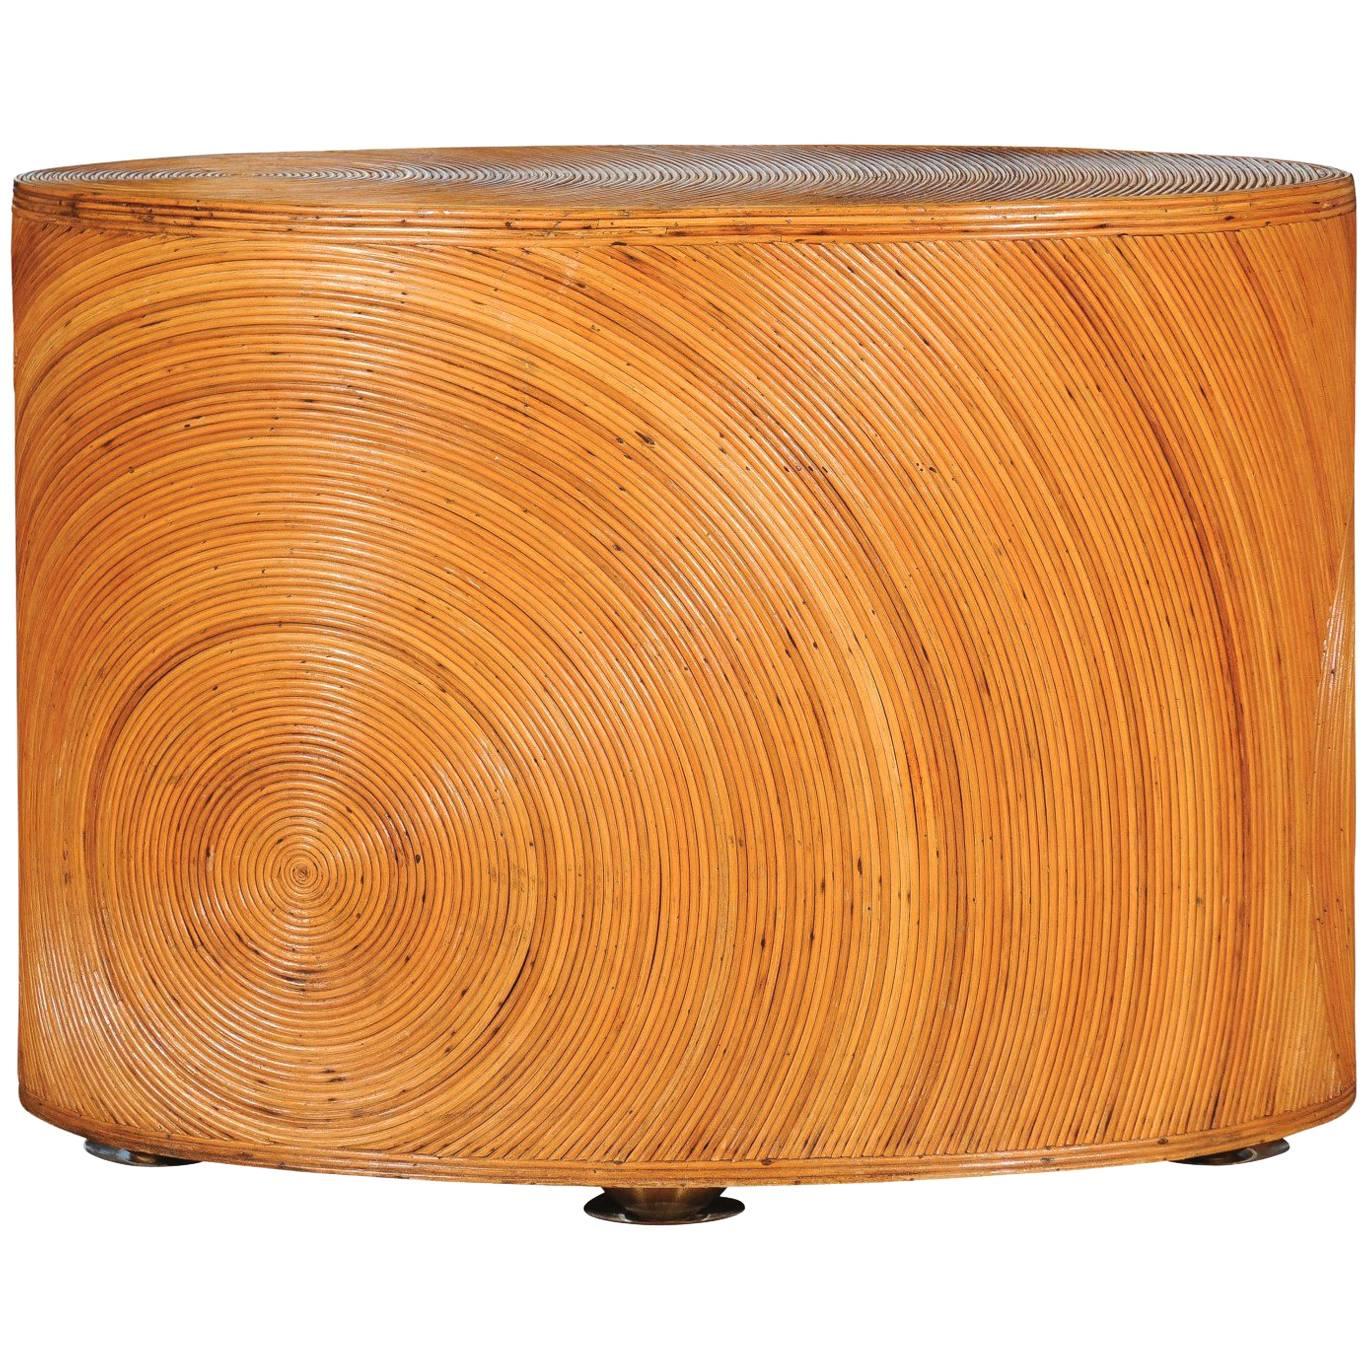 Dramatic Restored Vintage Oval Sunburst Bamboo and Brass Console